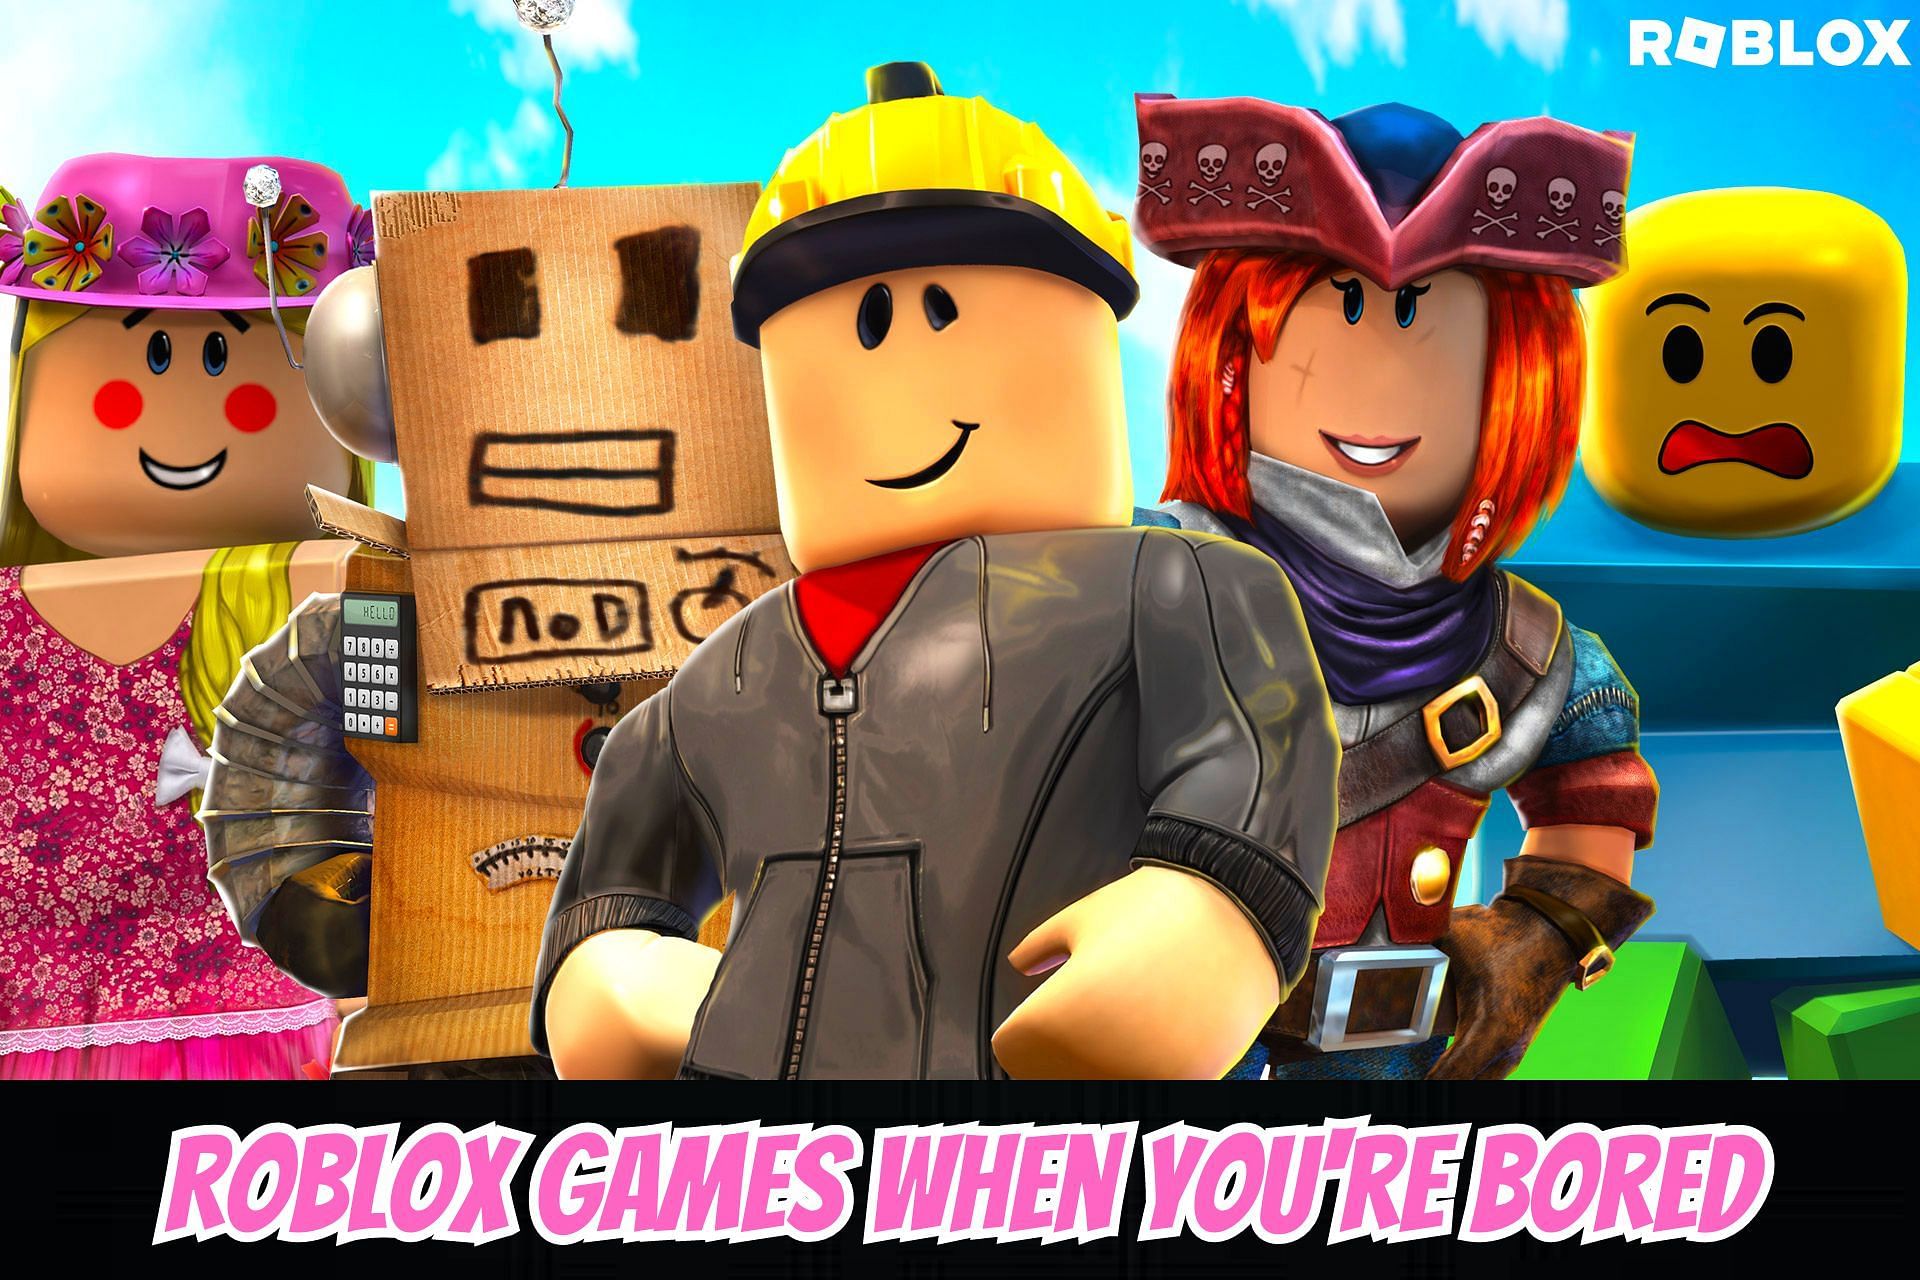 Roblox - Page 6 of 30 - Hardcore Gamer